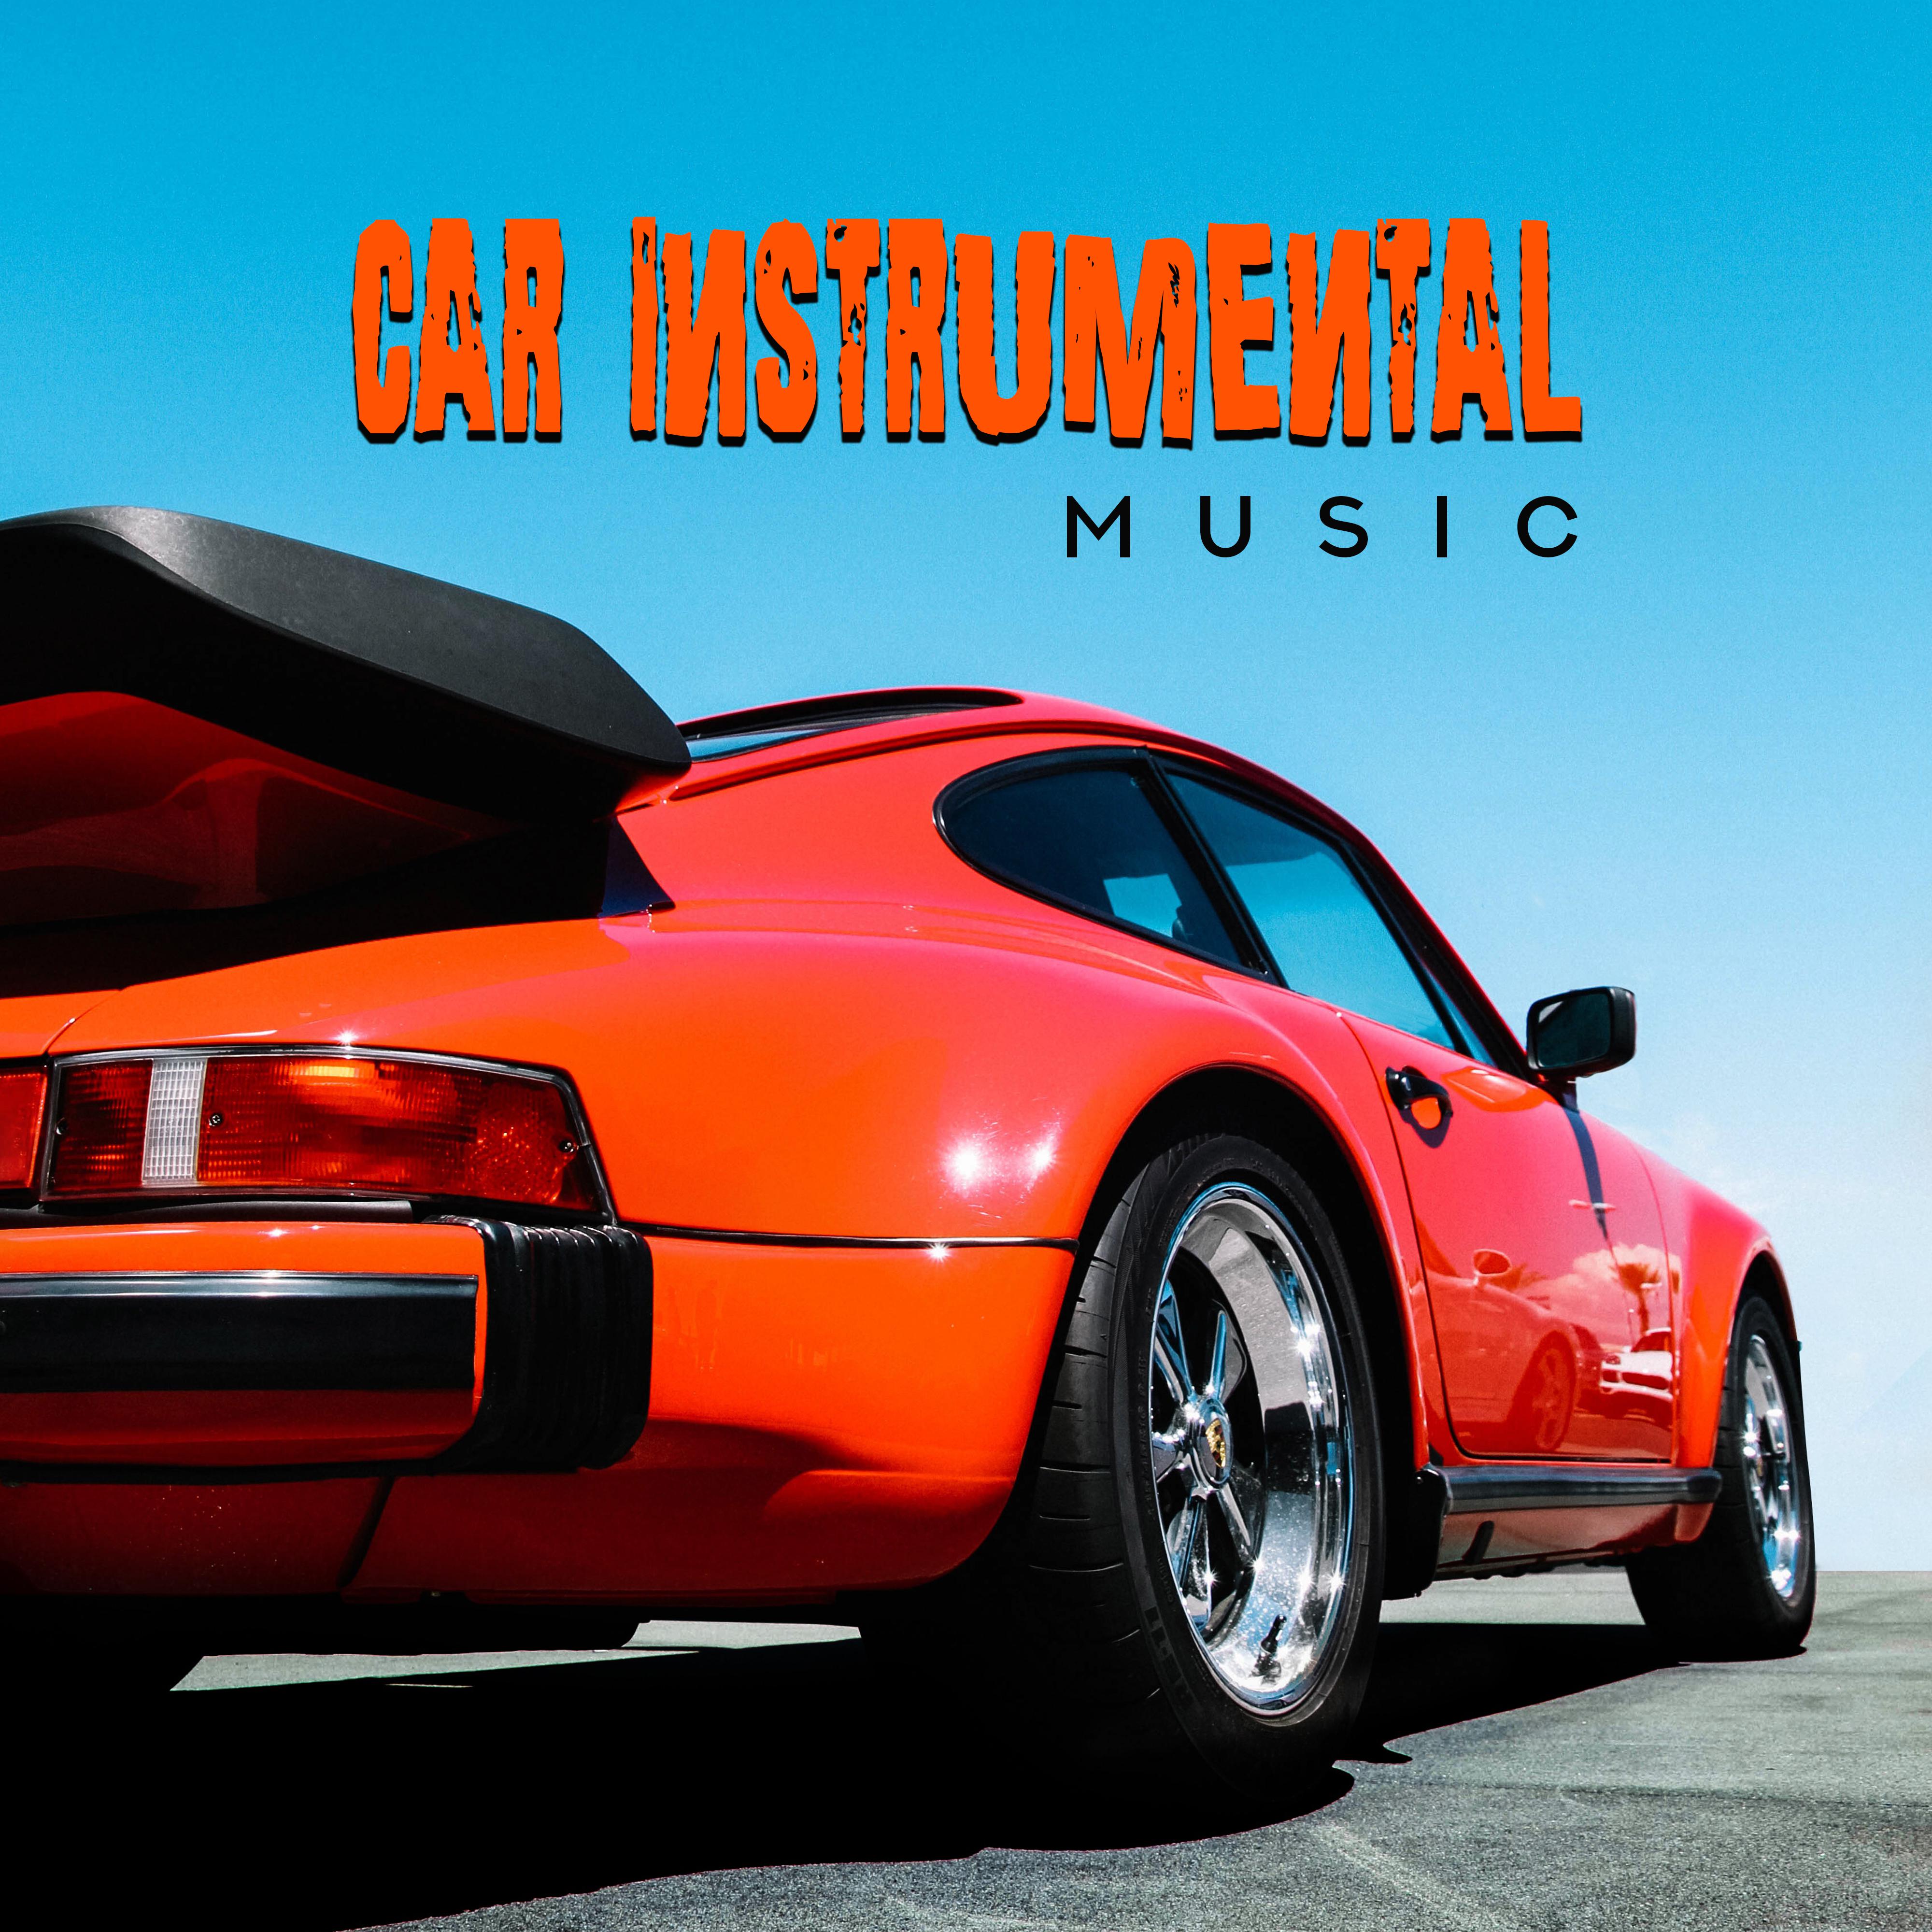 Car Instrumental Music - Jazz Edition of 15 Tracks for Short and Longer Car Travels